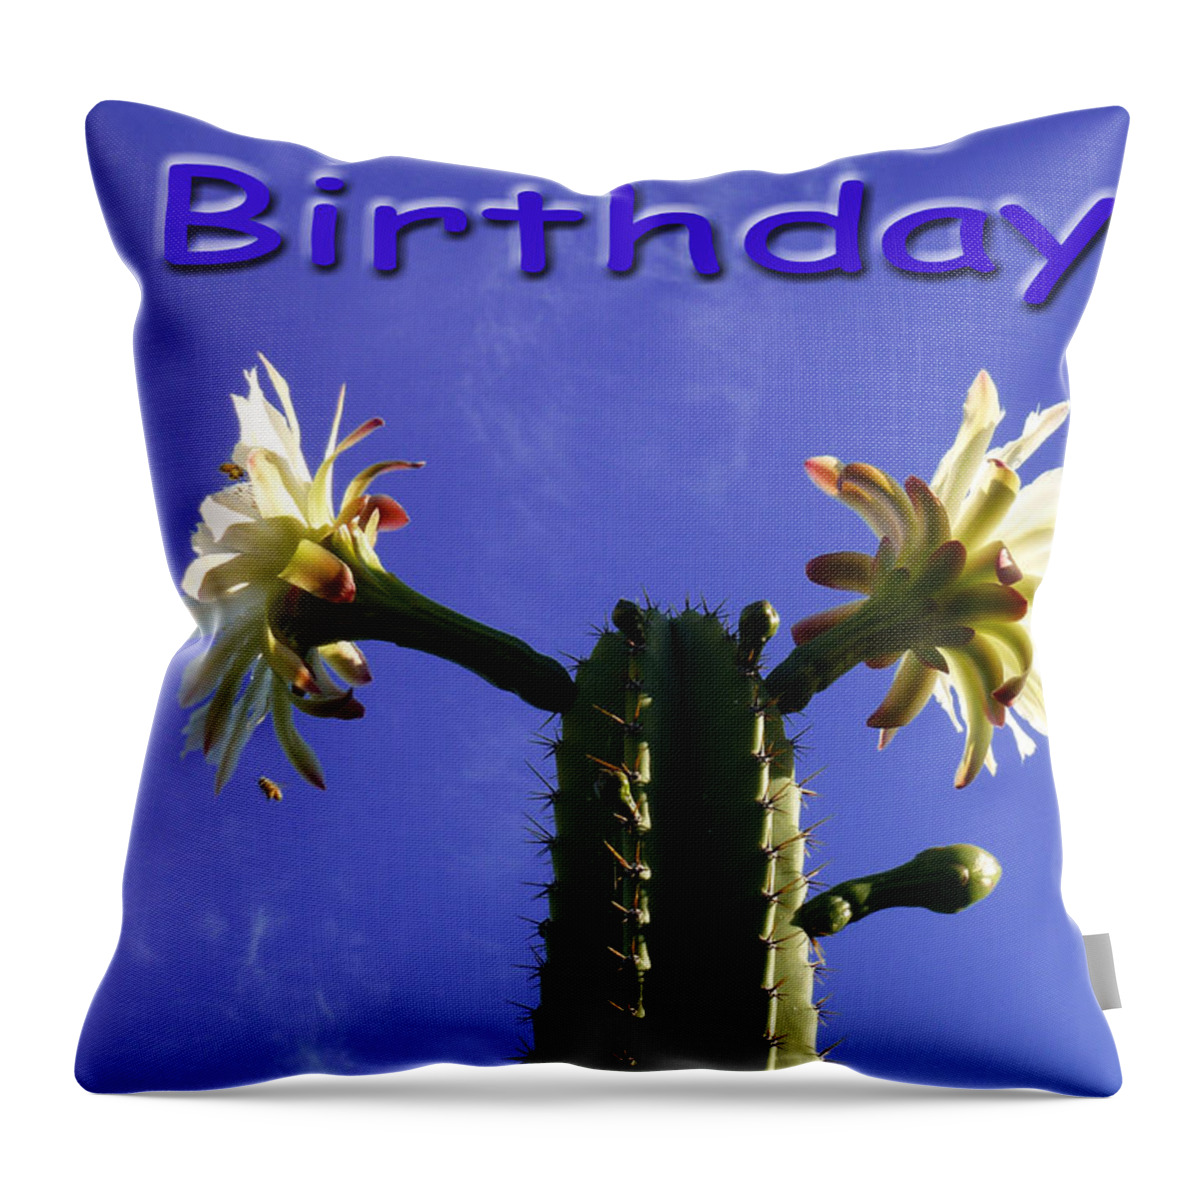 Birthday Throw Pillow featuring the photograph Happy Birthday Card And Print 1 by Mariusz Kula